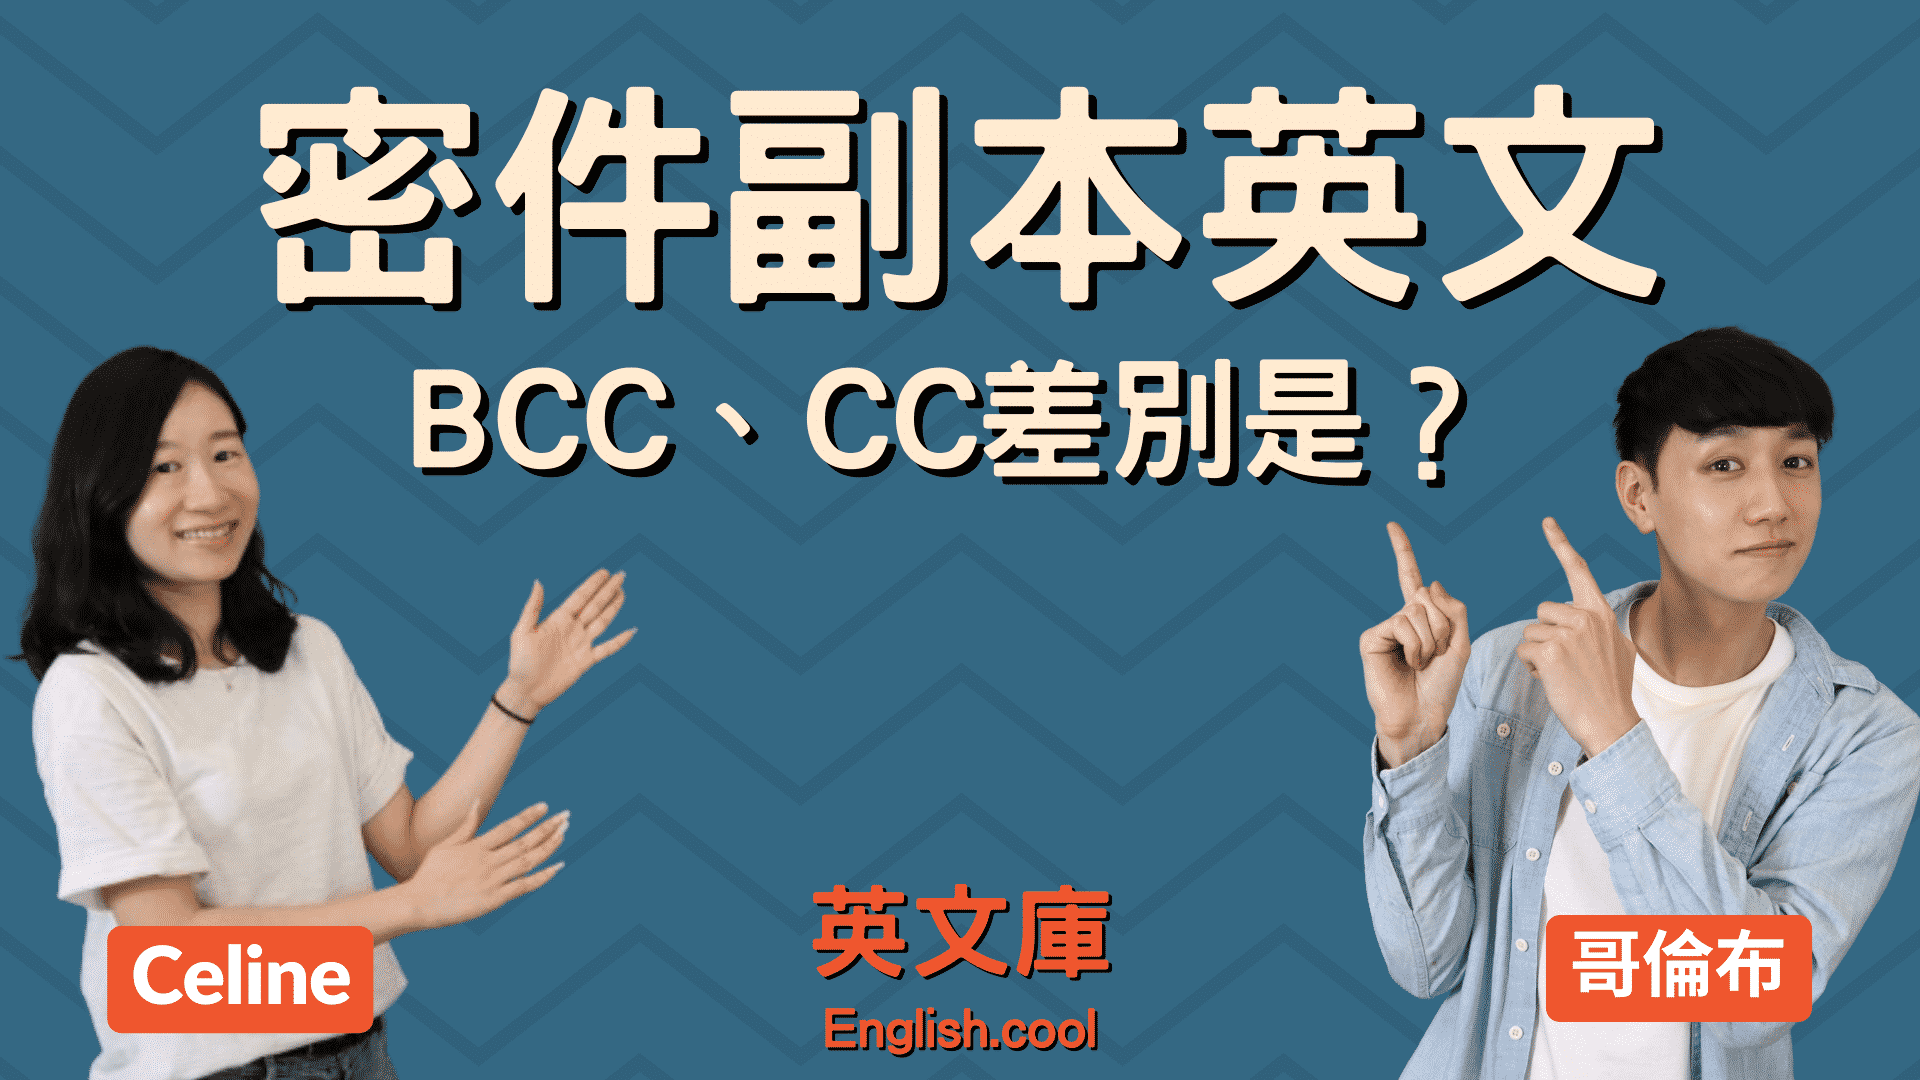 You are currently viewing 【密件副本解釋】「CC」跟「BCC」是什麼意思？ 差在哪？